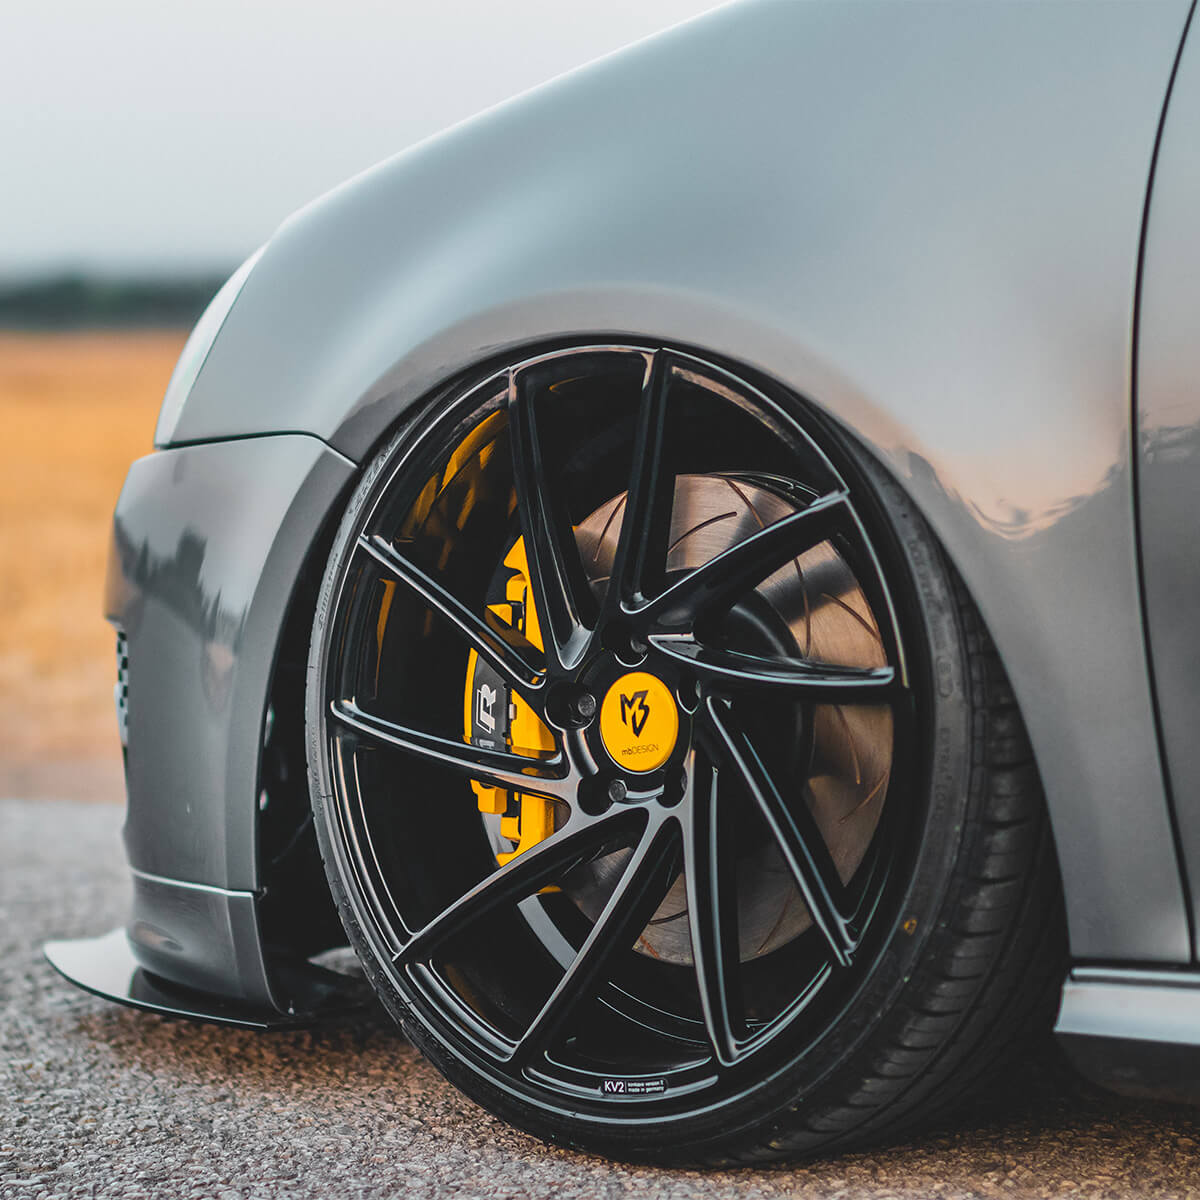 VW Golf R yellow painted calipers and black rims